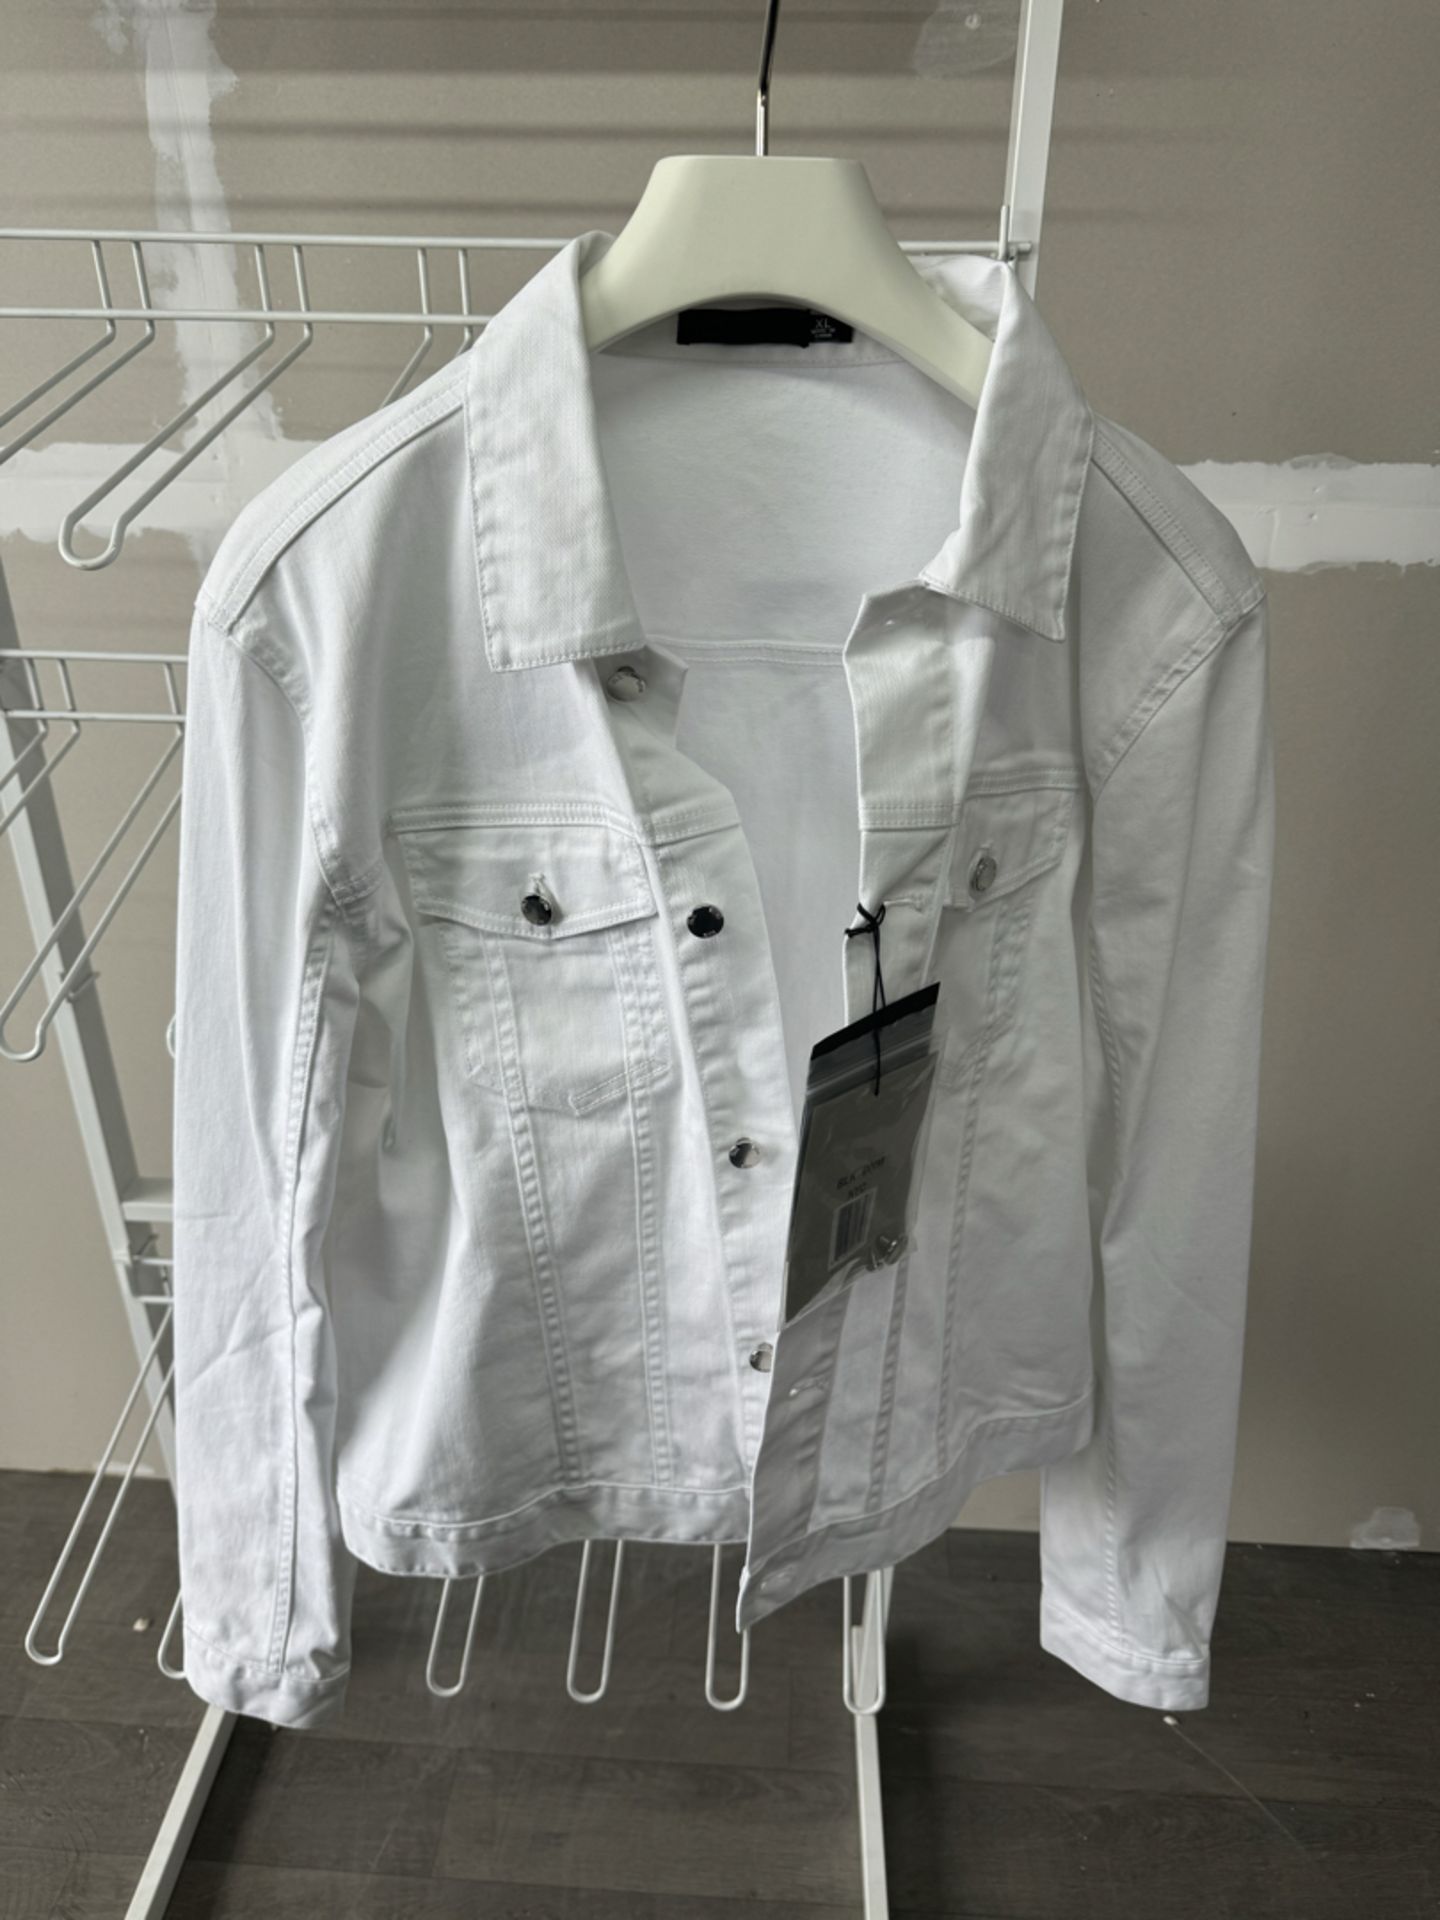 BLK DNM NYC Unisex White Jacket - New with Tags - Size XL - RRP Â£150+ - NO VAT!